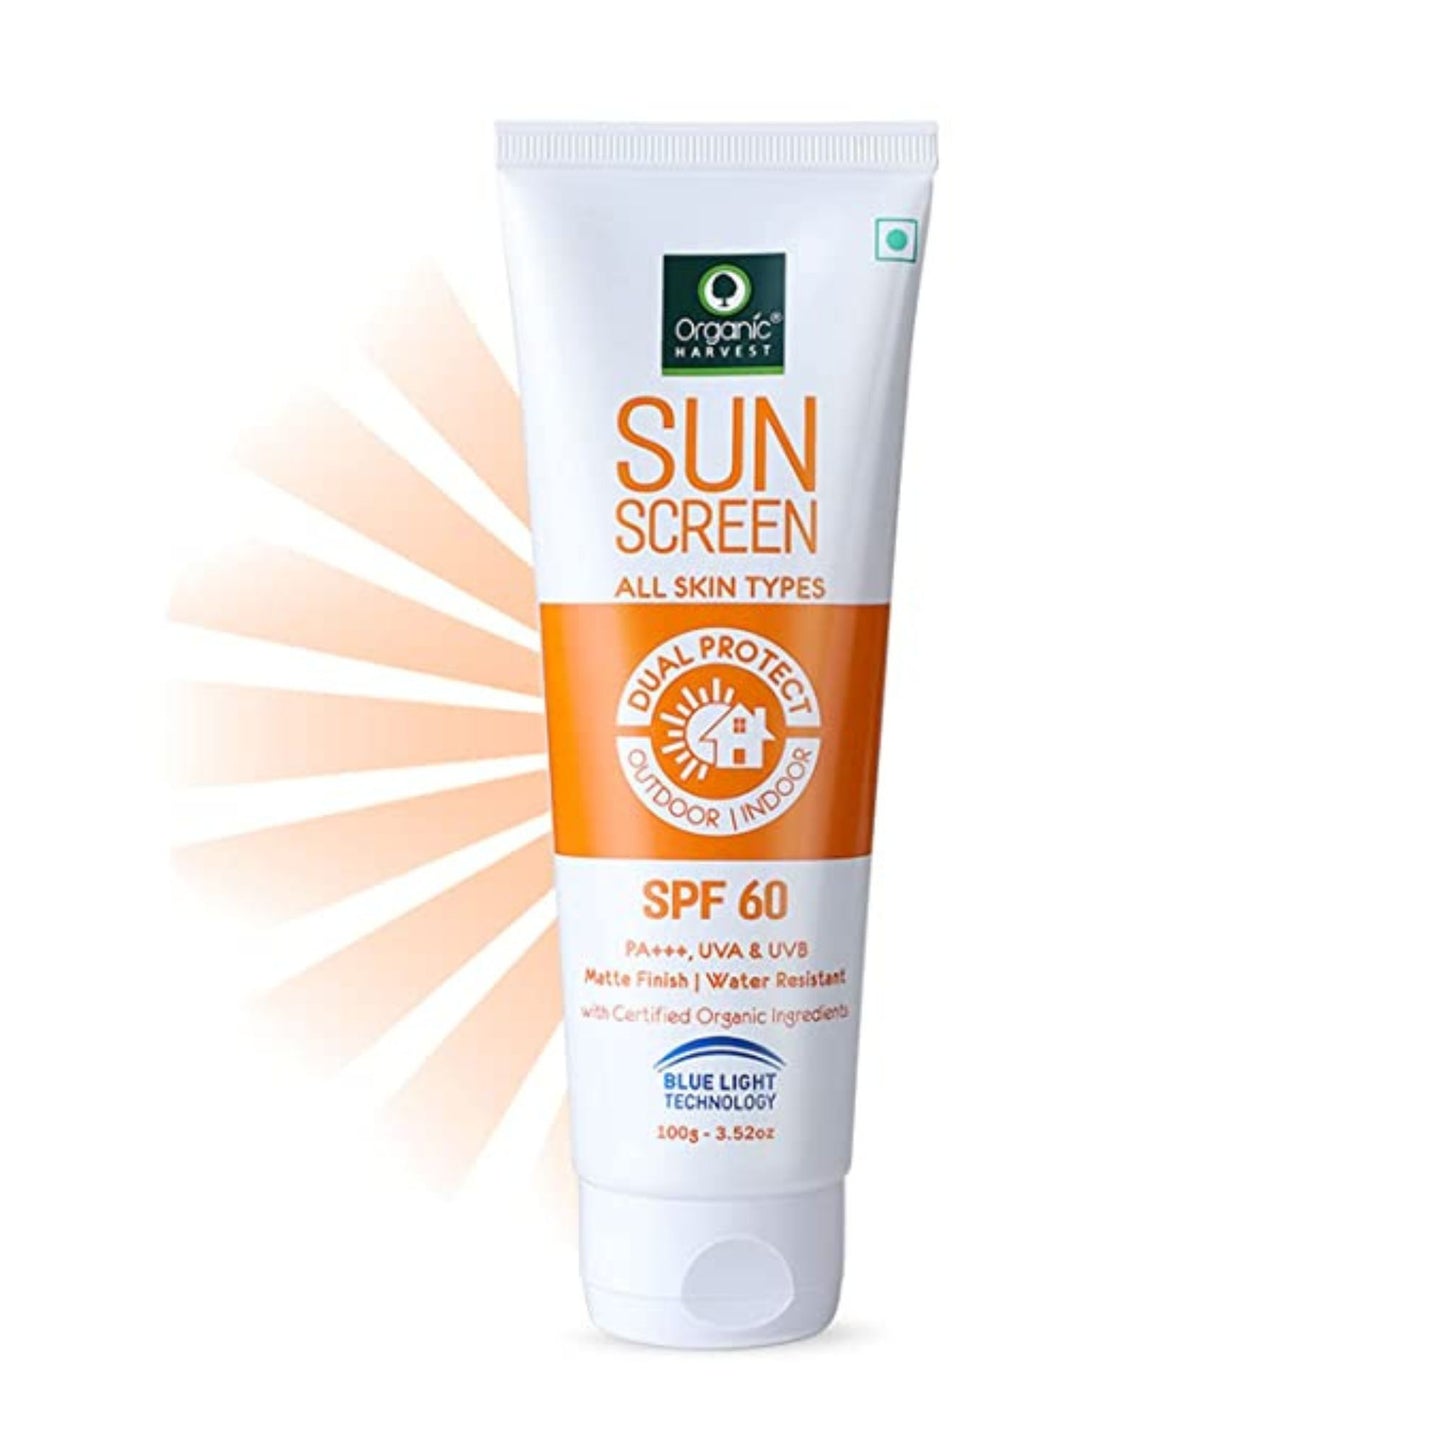 Organic Harvest Sunscreen SPF or All Skin Type | Sunscreen Lotion for Women & Men with Blue Light Technology, Protects From Harmful UVA & UVB Rays | Quick Absorb, Hydrates & Nourished Skin | Sulphate & Paraben Free